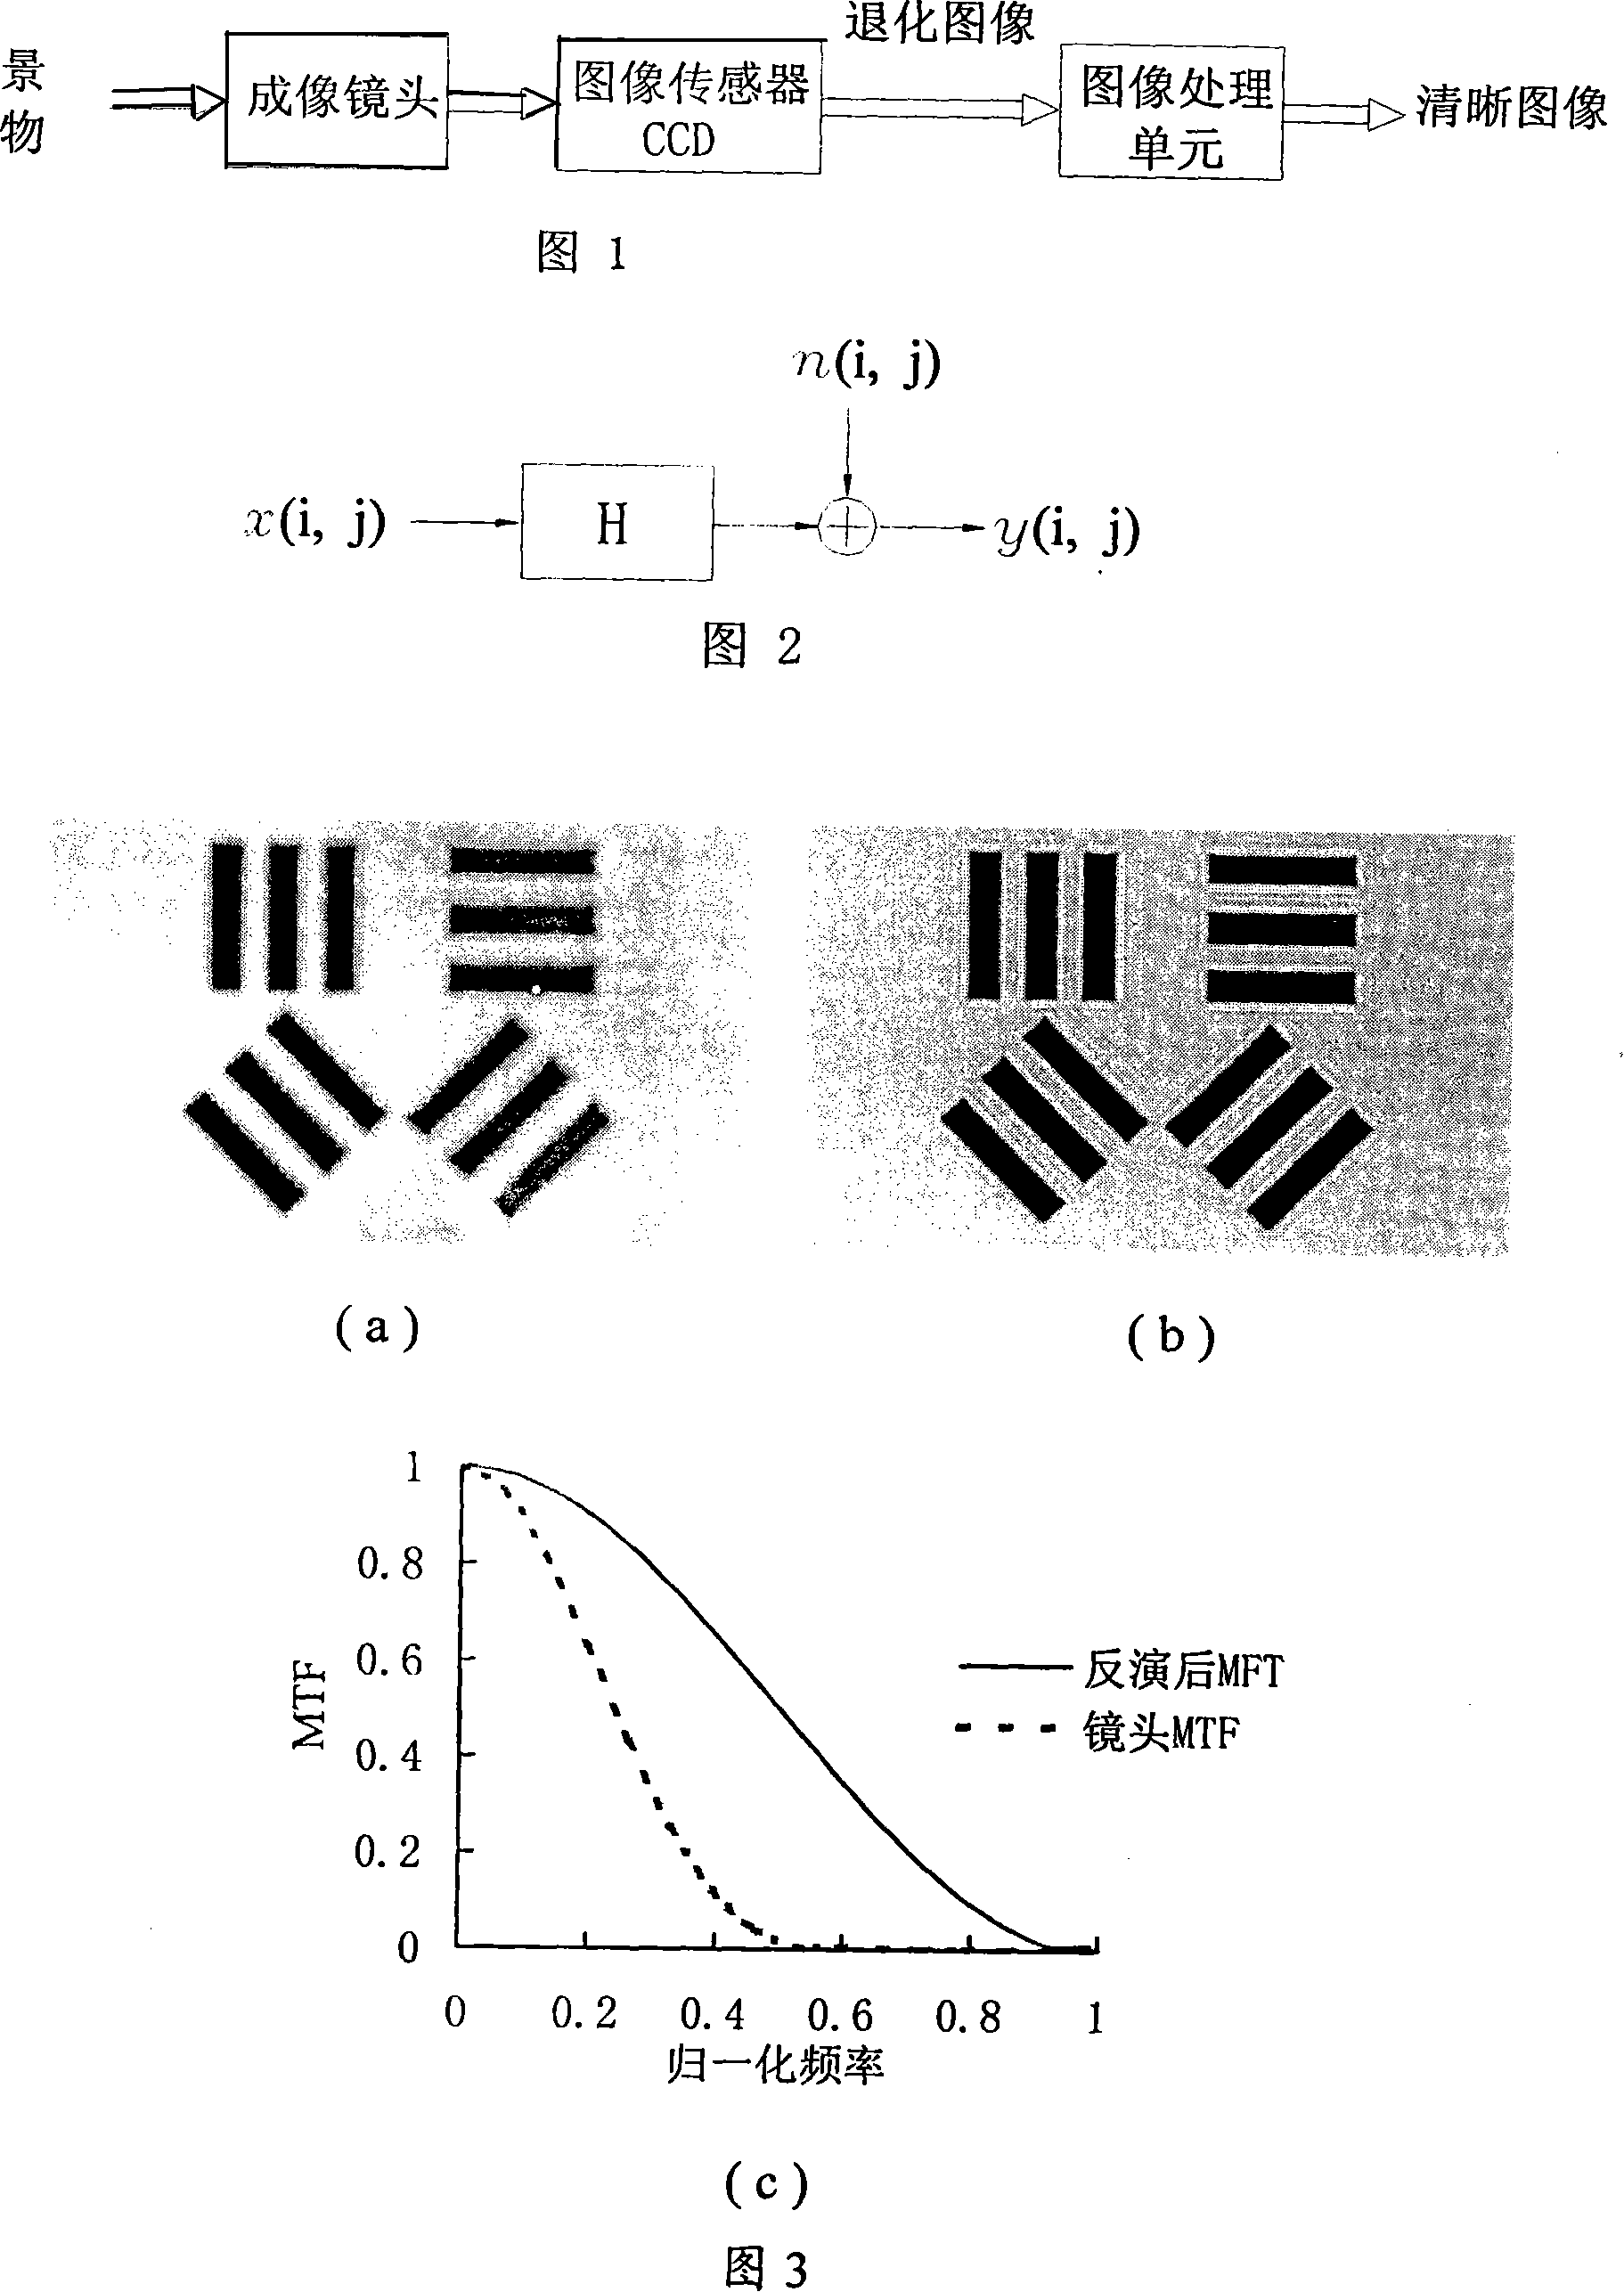 Image restoration method for image quality degraded imaging system with optical aberration and small hole diffraction